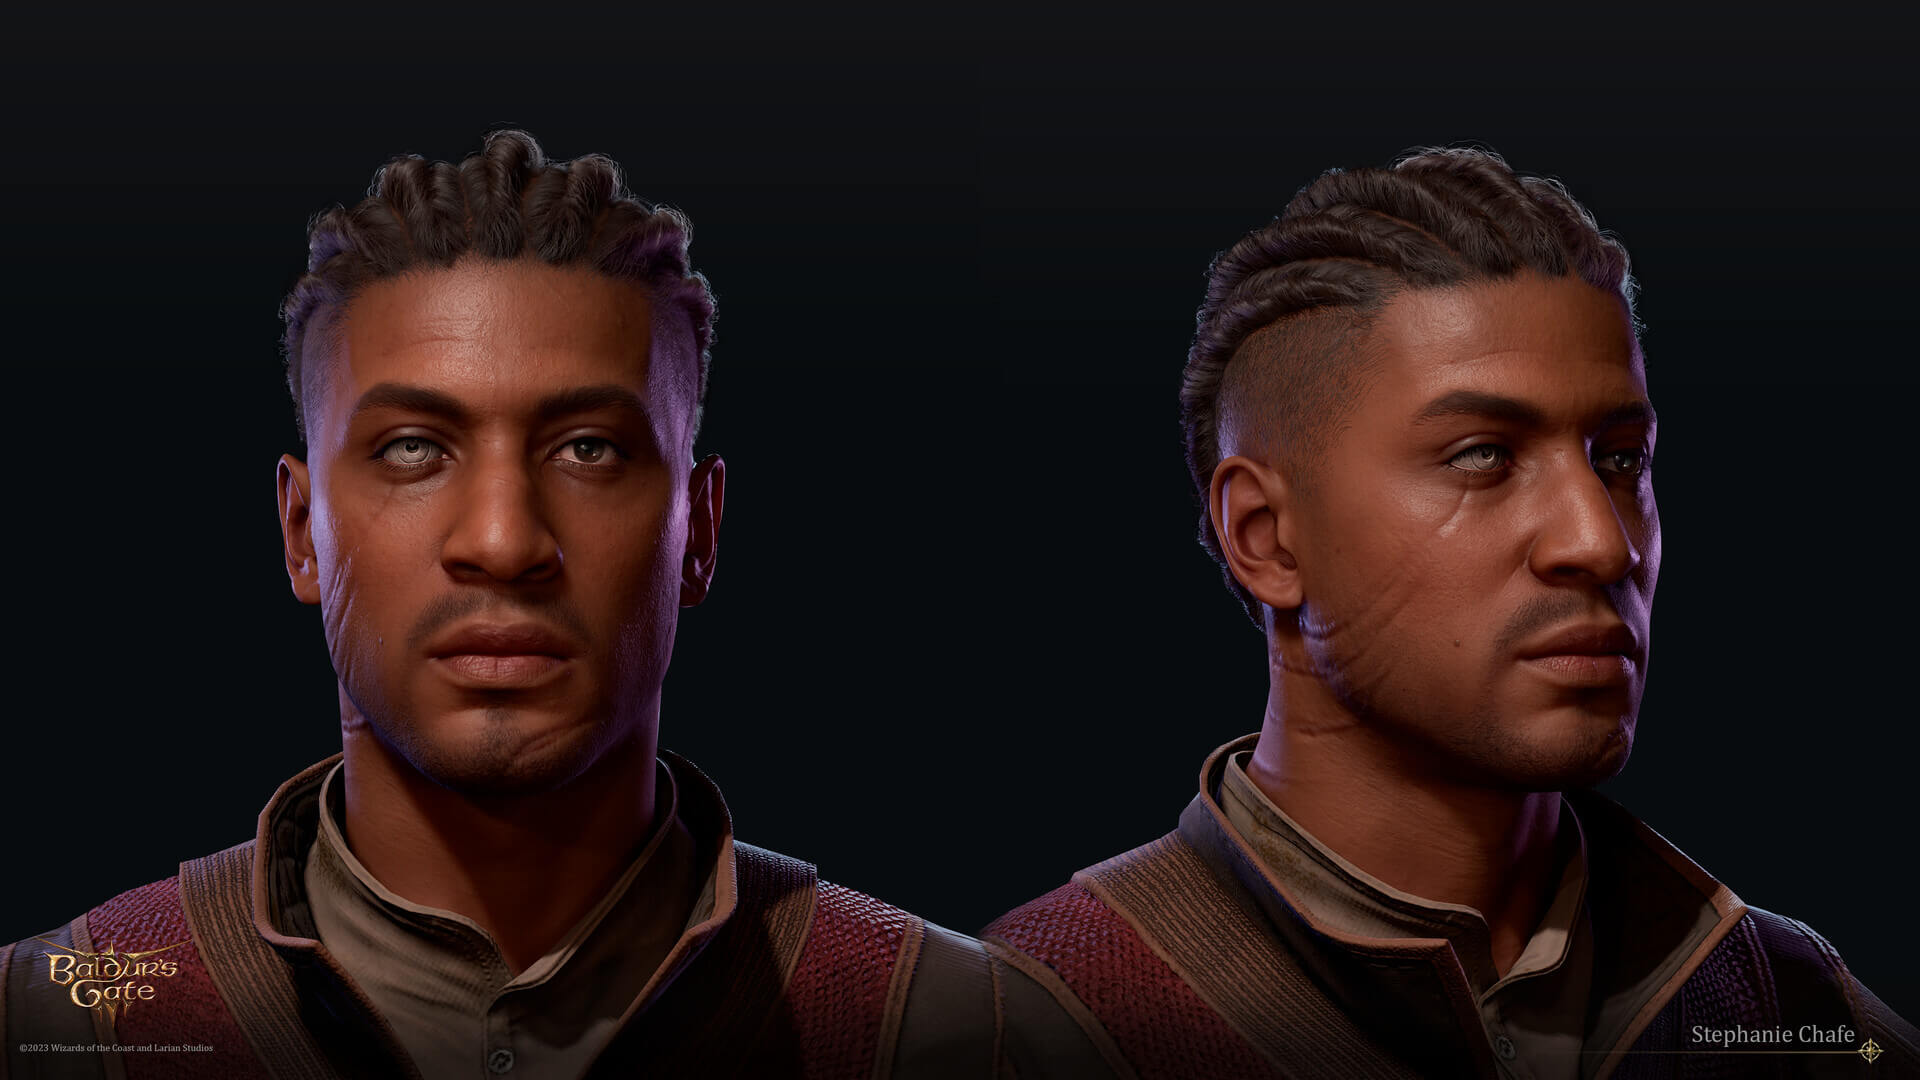 Portraits of Wyll showing his scars